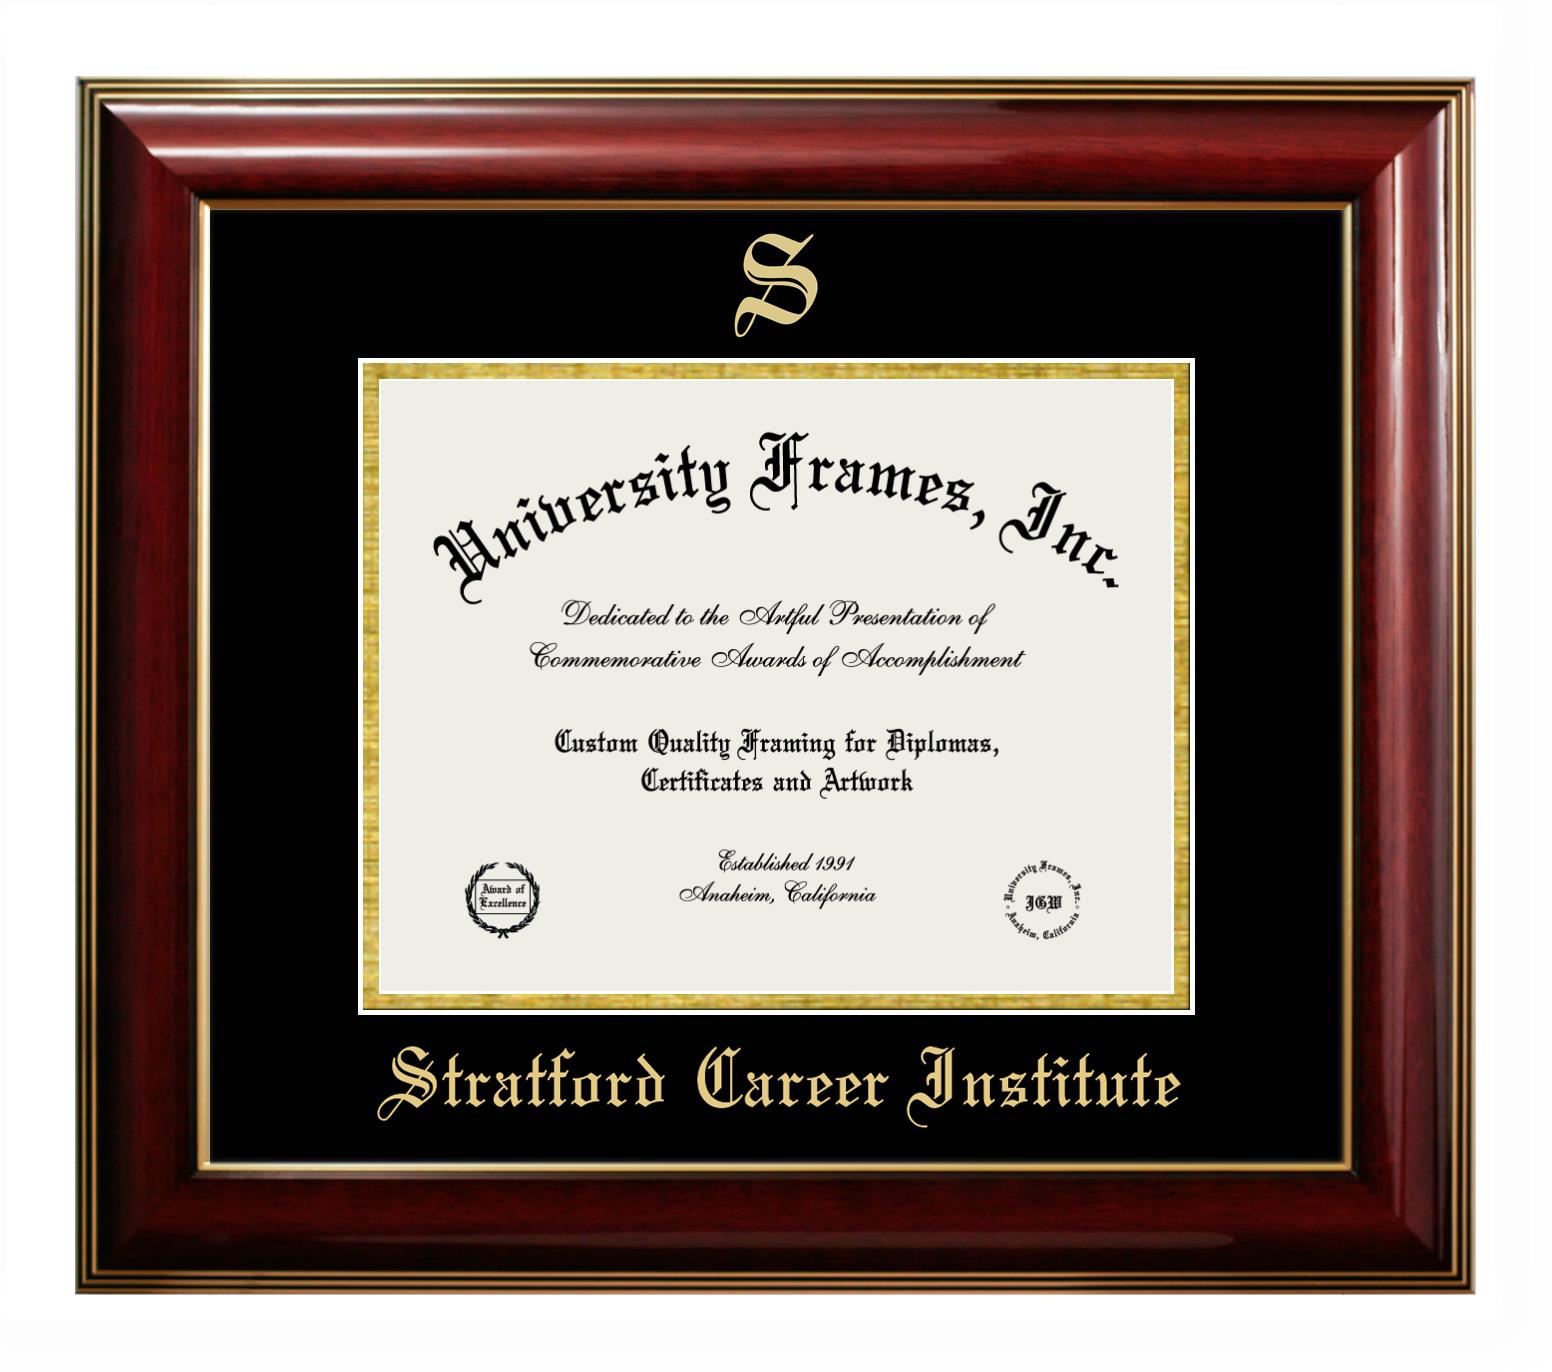 Stratford Career Institute Diploma Frame in Classic Mahogany with Gold